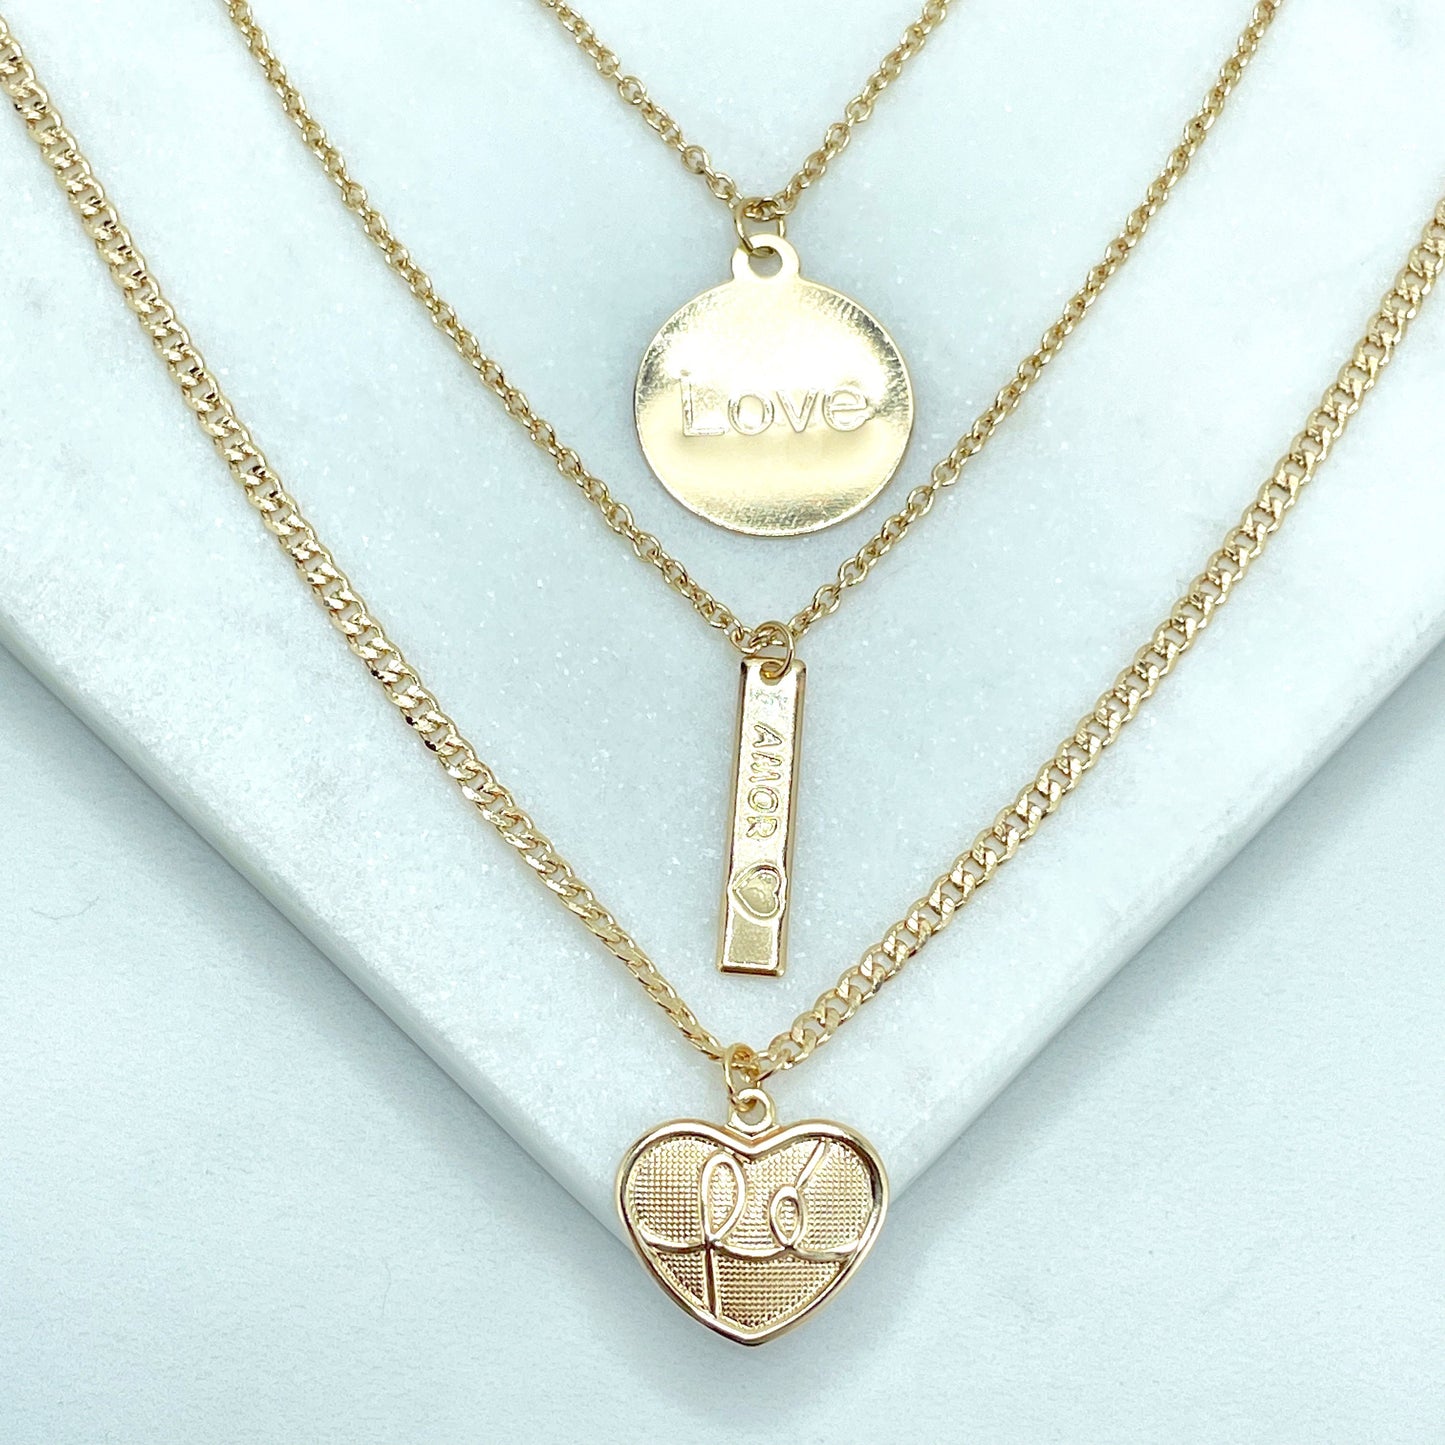 18k Gold Filled 03 Layered Necklace Set, with FÉ (Faith) Heart Shape, AMOR (Love) Board and LOVE Medal Charms, Wholesale Jewelry Supplies